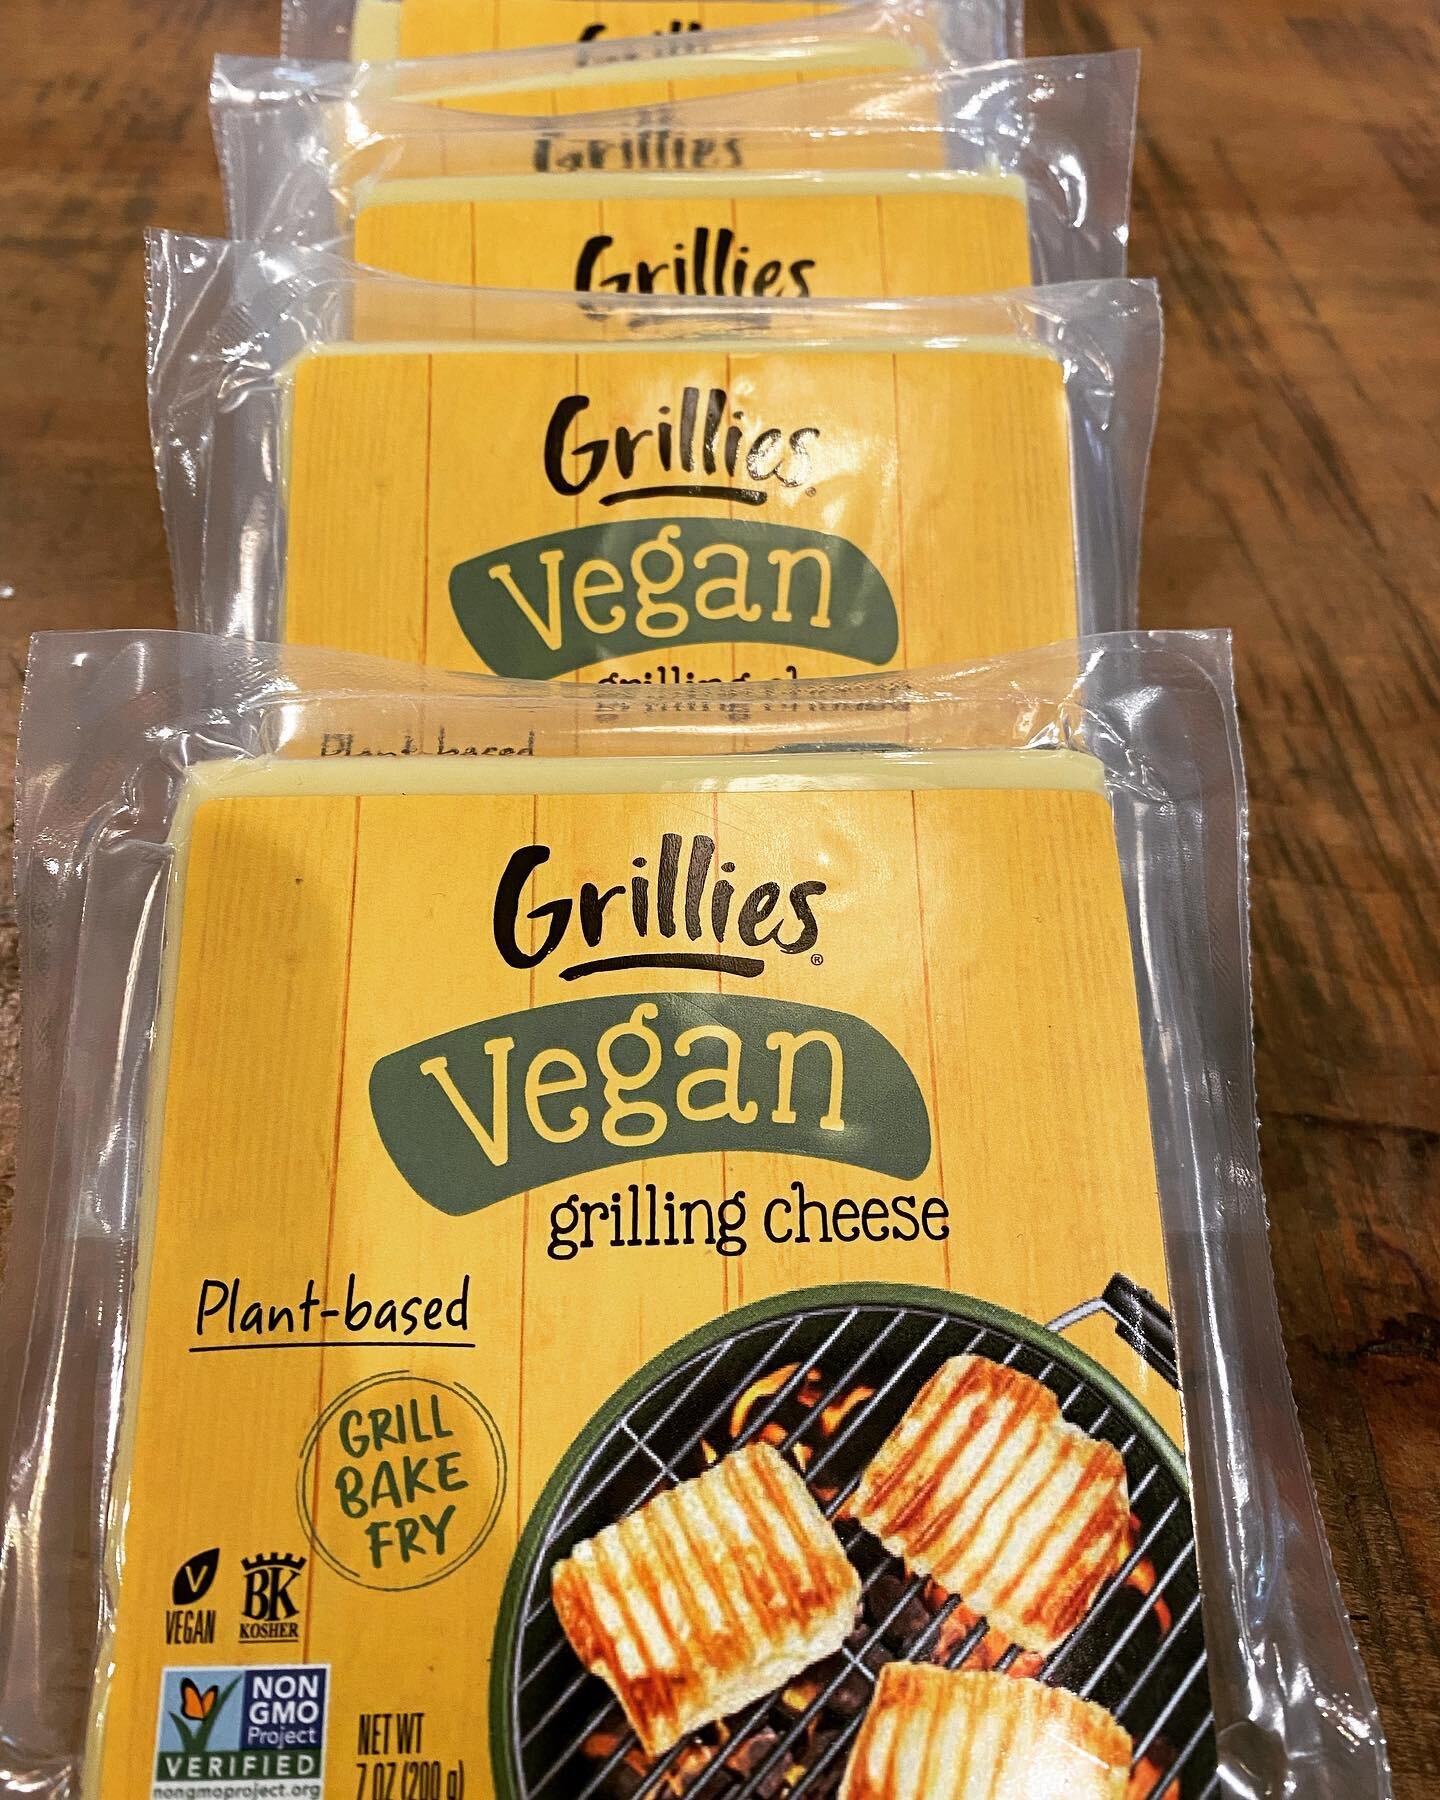 Vegan Halloumi. This cheese is sooo good grilled or browned in a pan with a touch of olive oil. #cheese #veganfood #vegan #vegancheese #grilling #grillingseason #appetizers #salad #justlikethat #shoplocal #supportsmallbusiness #veganlife #veganfoodsh